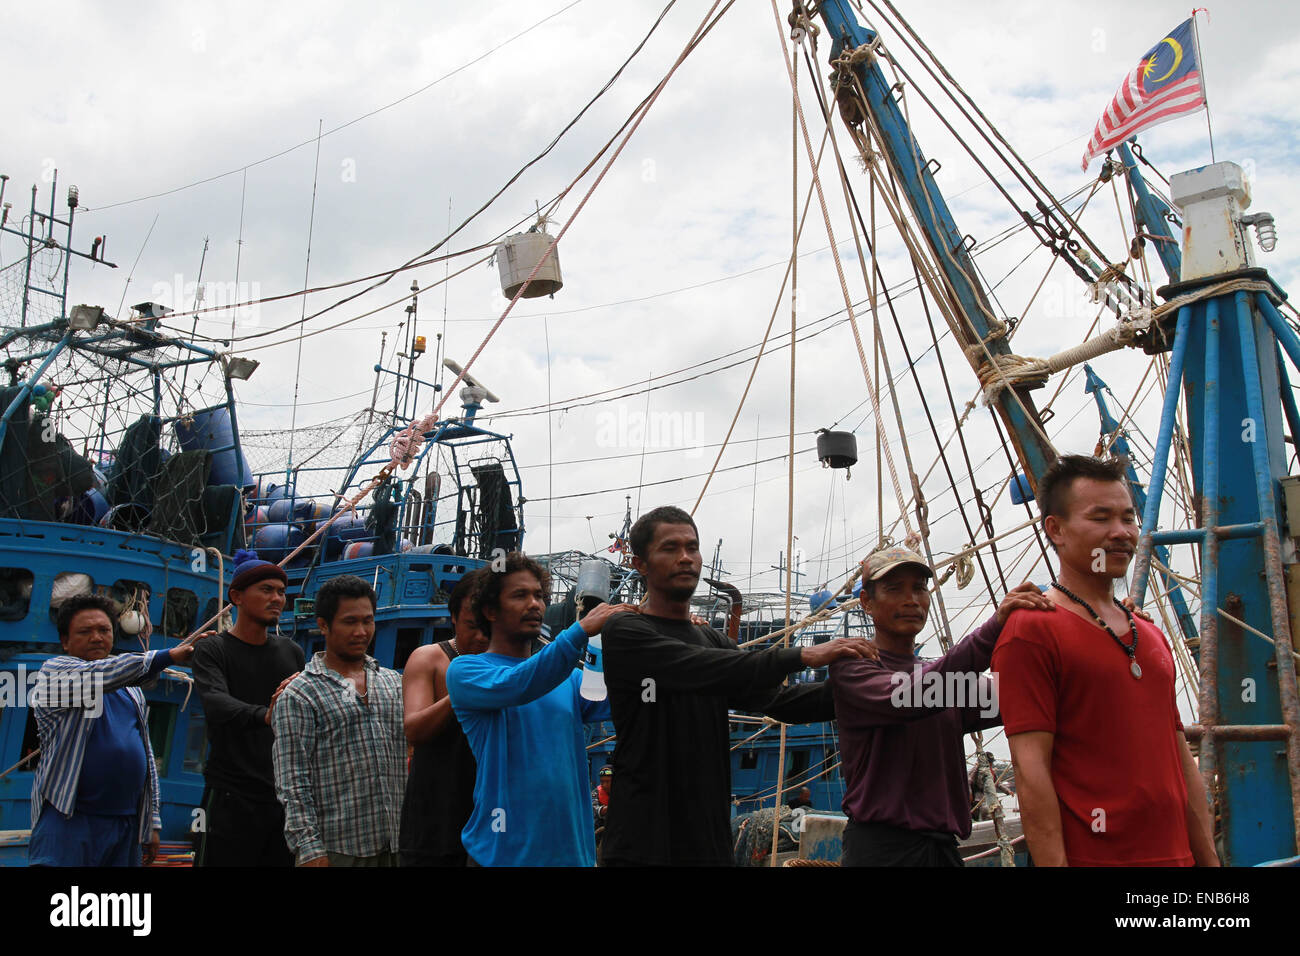 Indonesian war ship, Kapitan Pattimura arrested three Malaysian-flagged fishing boats and two fishing boats flag Thailand. The ships were suspected of illegal fishing in the waters of males in the Indonesia-Malaysia border, which still included in the territory of Indonesia. Currently five ships and 62 sailors detained in Indonesia Naval Base in Singapore for further legal processing. (Photo b y Yohanes Kurnia Irawan/Pacific Press) Stock Photo